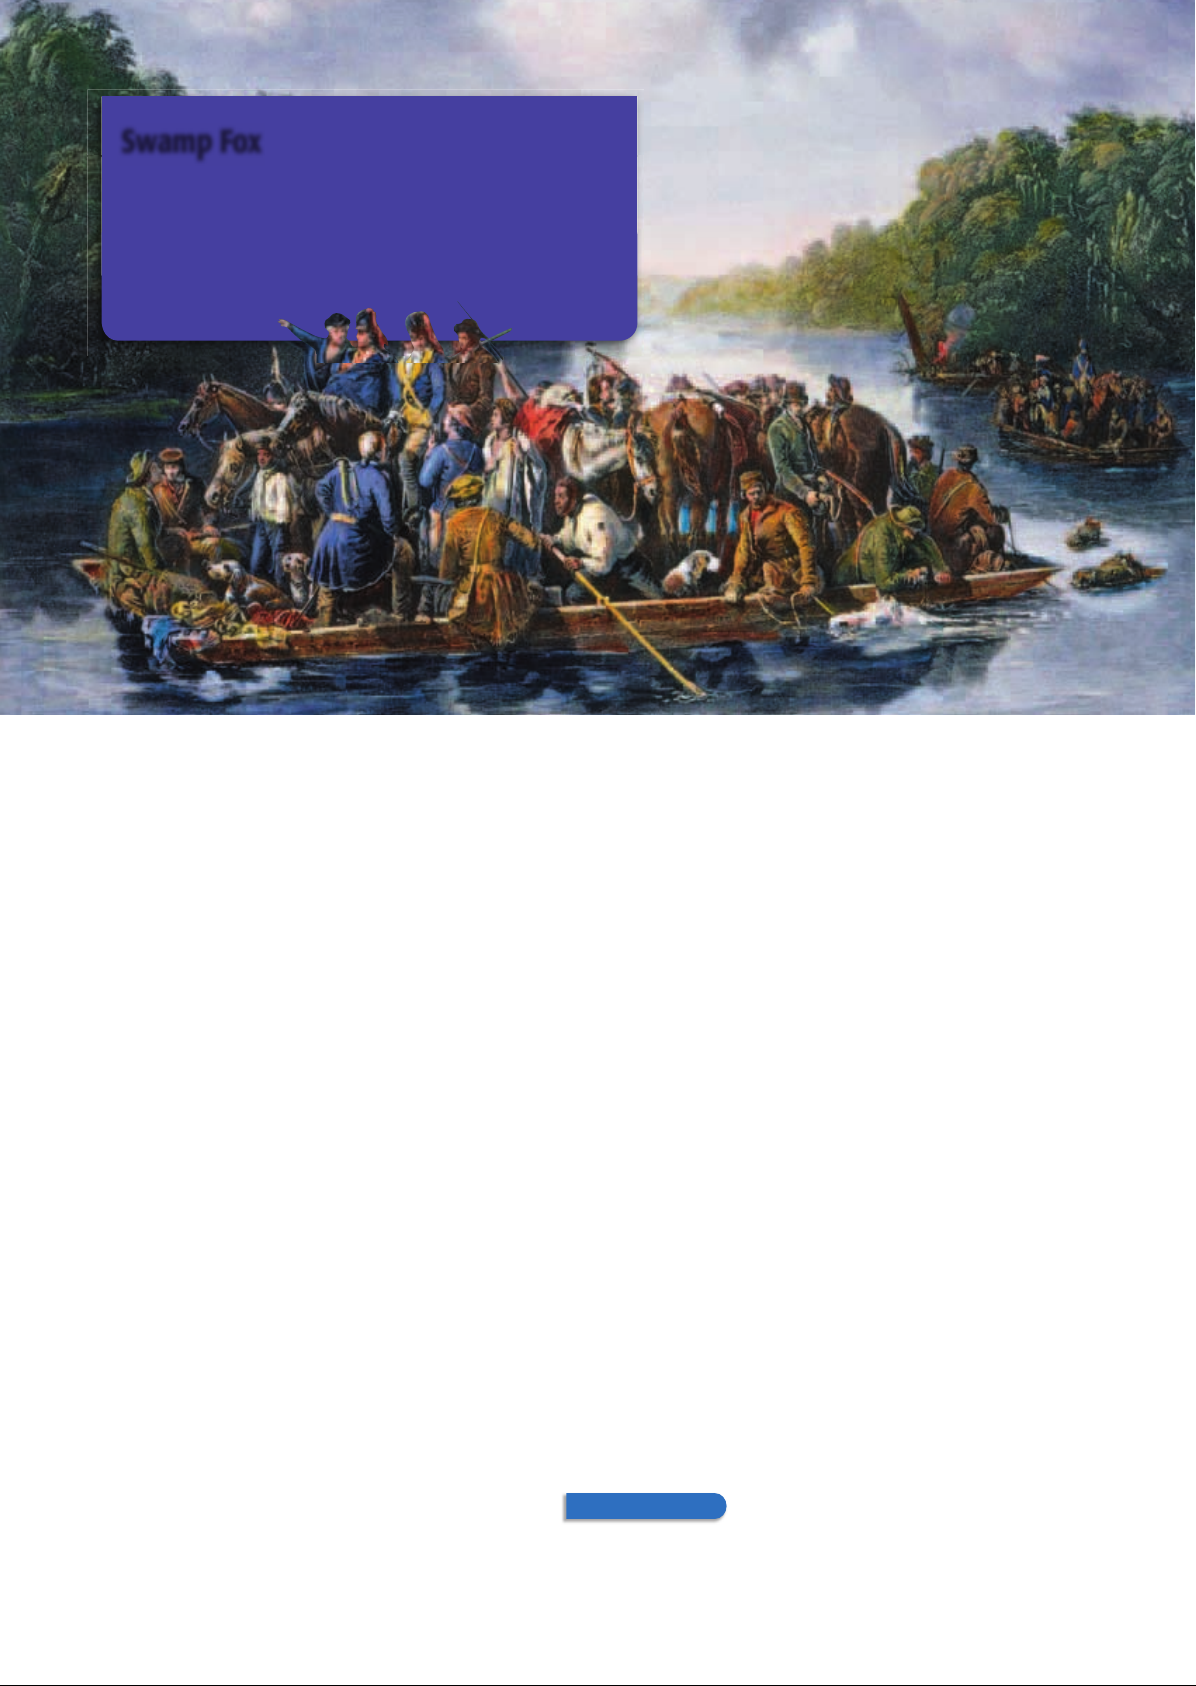 US_History_Textbook_8th_Grade_Chapter_3_The_American_Revolution Image-23